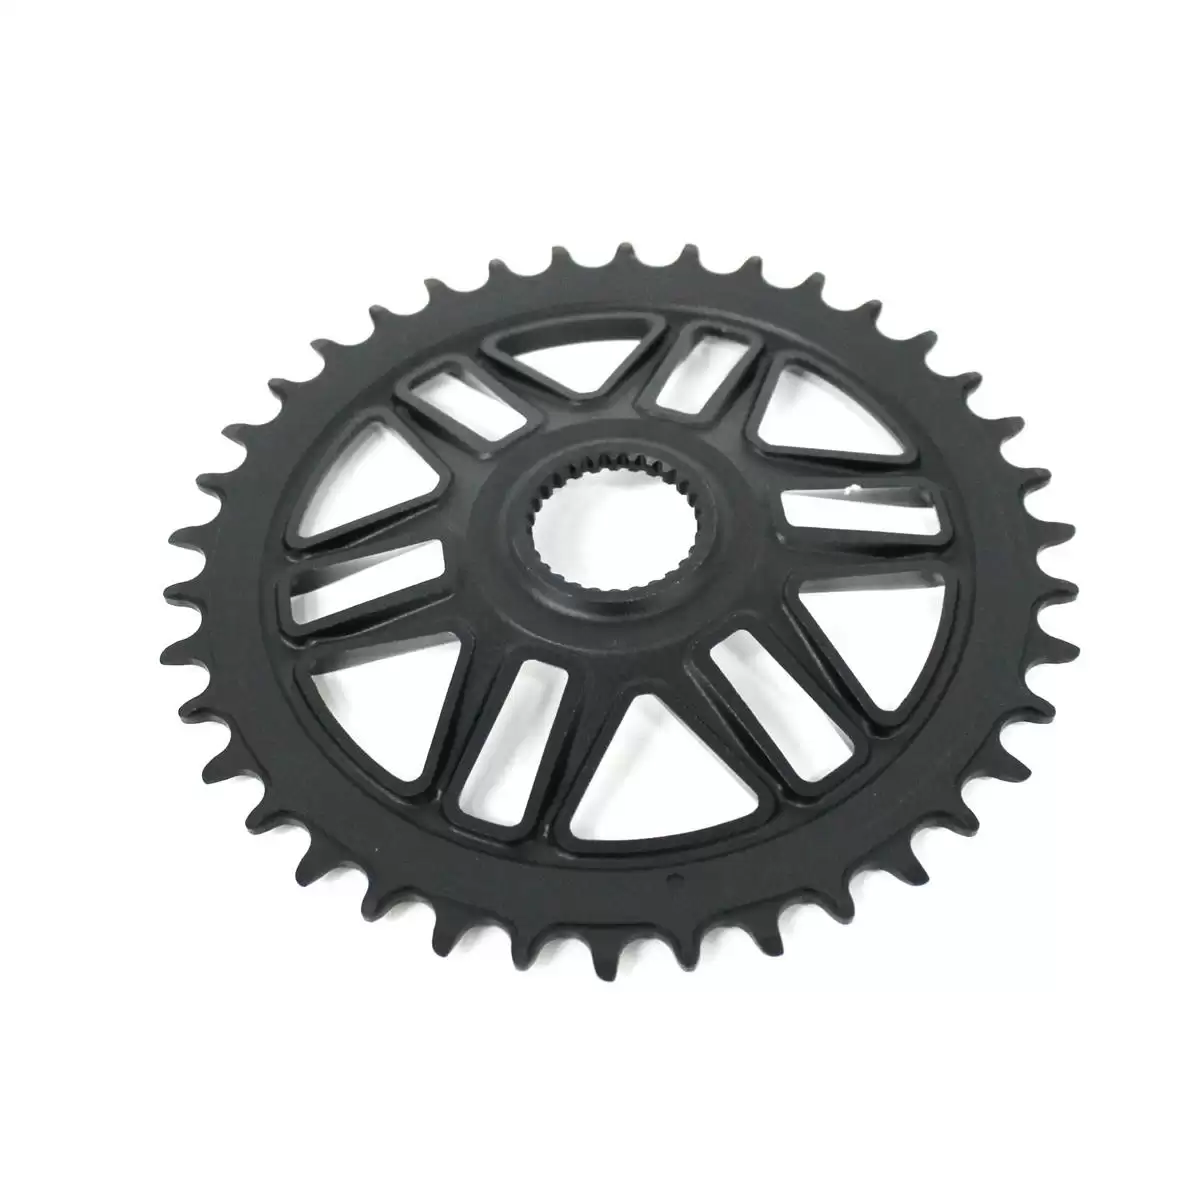 The Chainring 38t direct mount 12v for models with Bosch Gen4 engine from 2020 #2